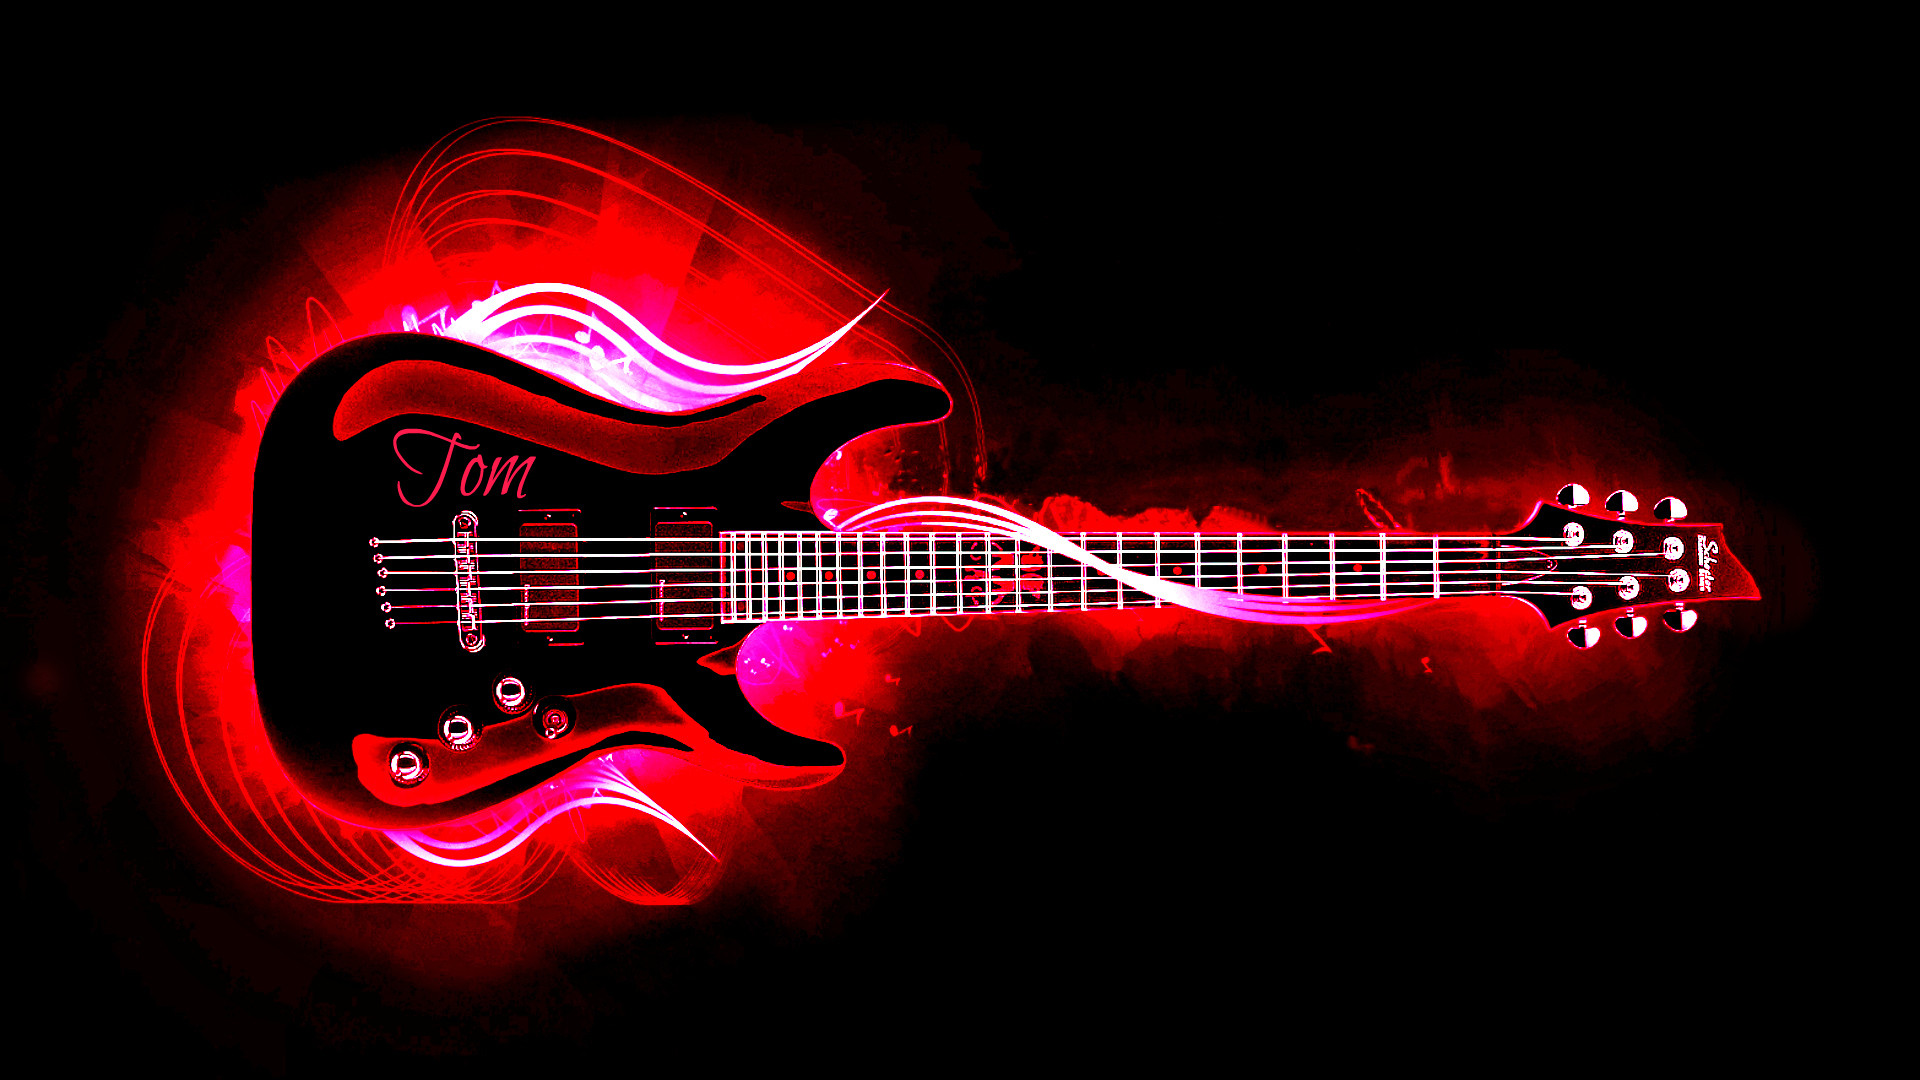 1920x1080 Guitar Images: Find best latest Guitar Images in HD for your PC desktop  background & mobile phones.